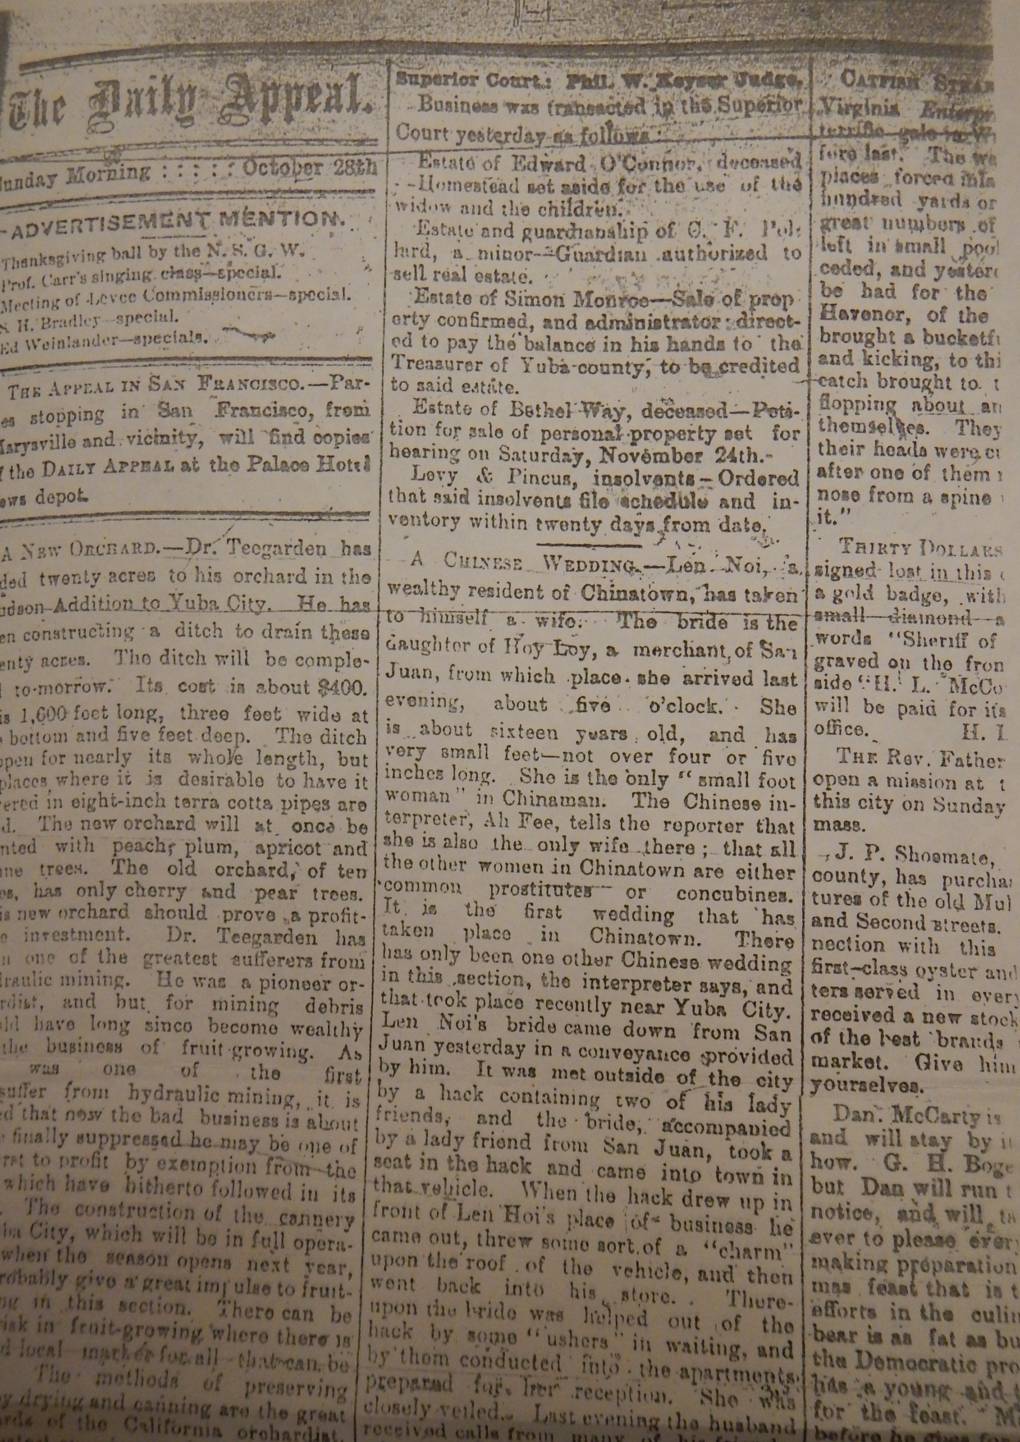 The Marysville Daily Appeal featured an article about Jennie Noy's wedding in 1883.